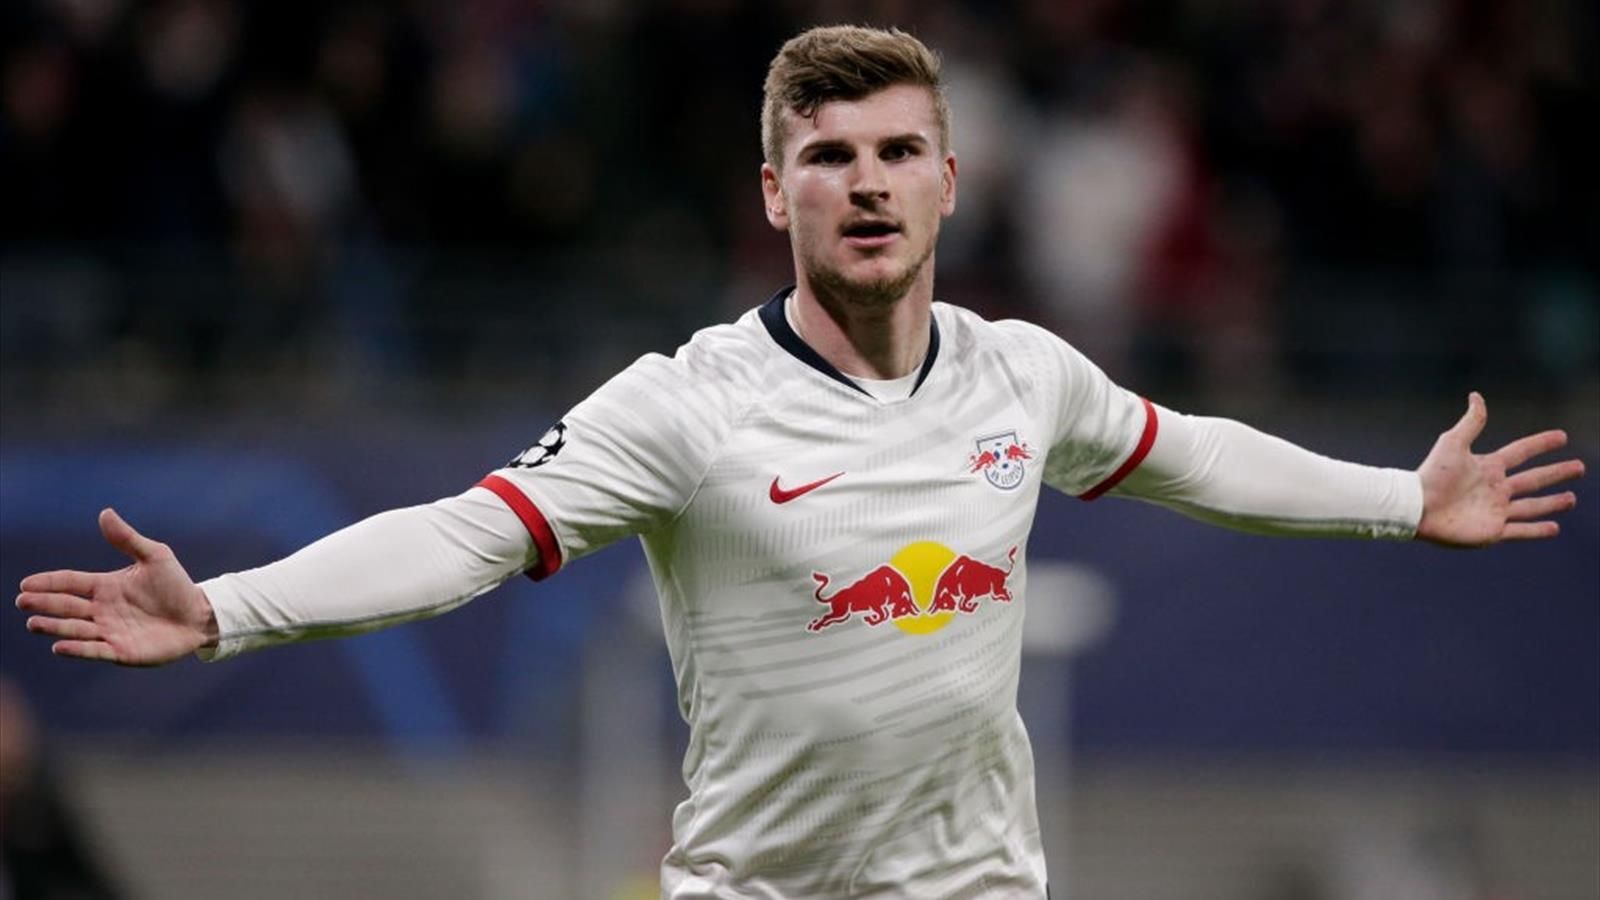 Chelsea Confirmed to Have Signed Timo Werner Away from RB Leipzig